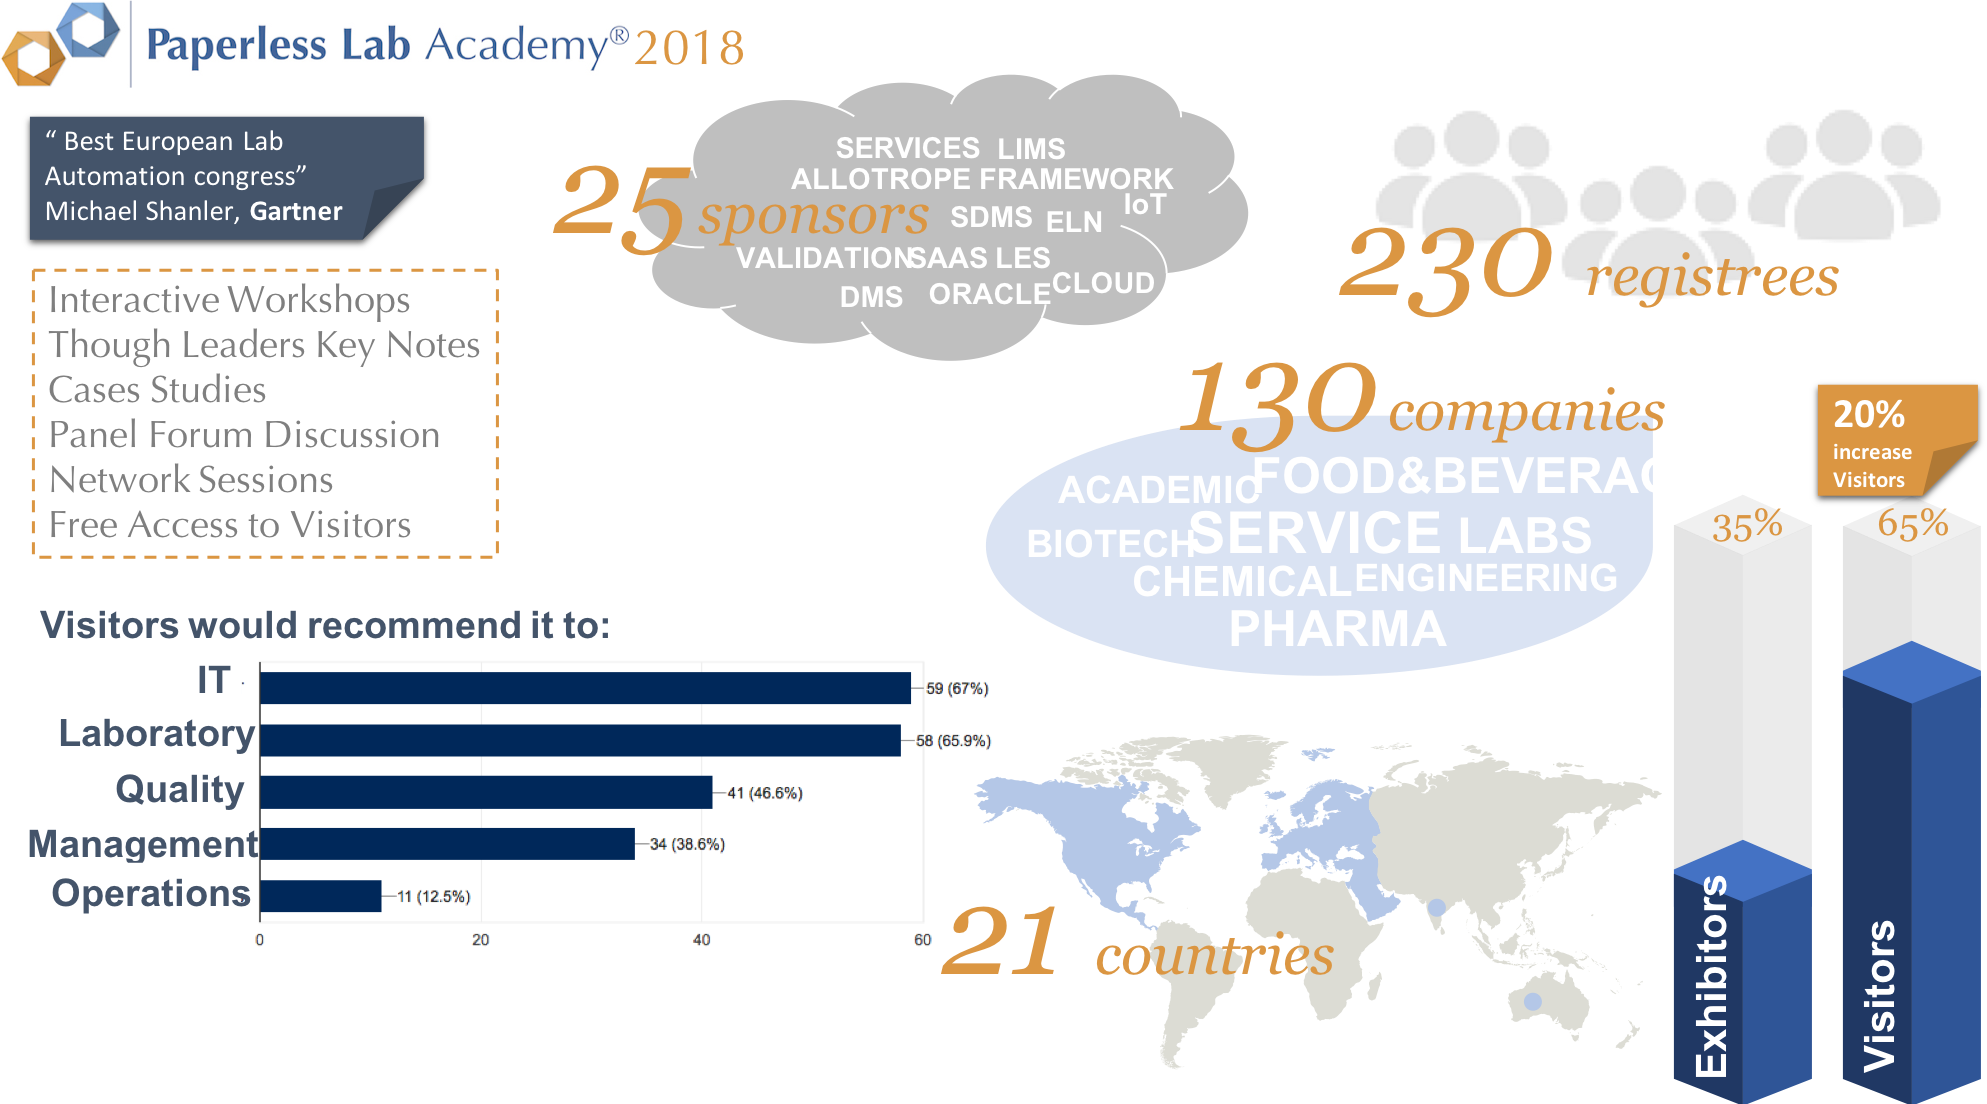 paperless lab academy 2018 infographic